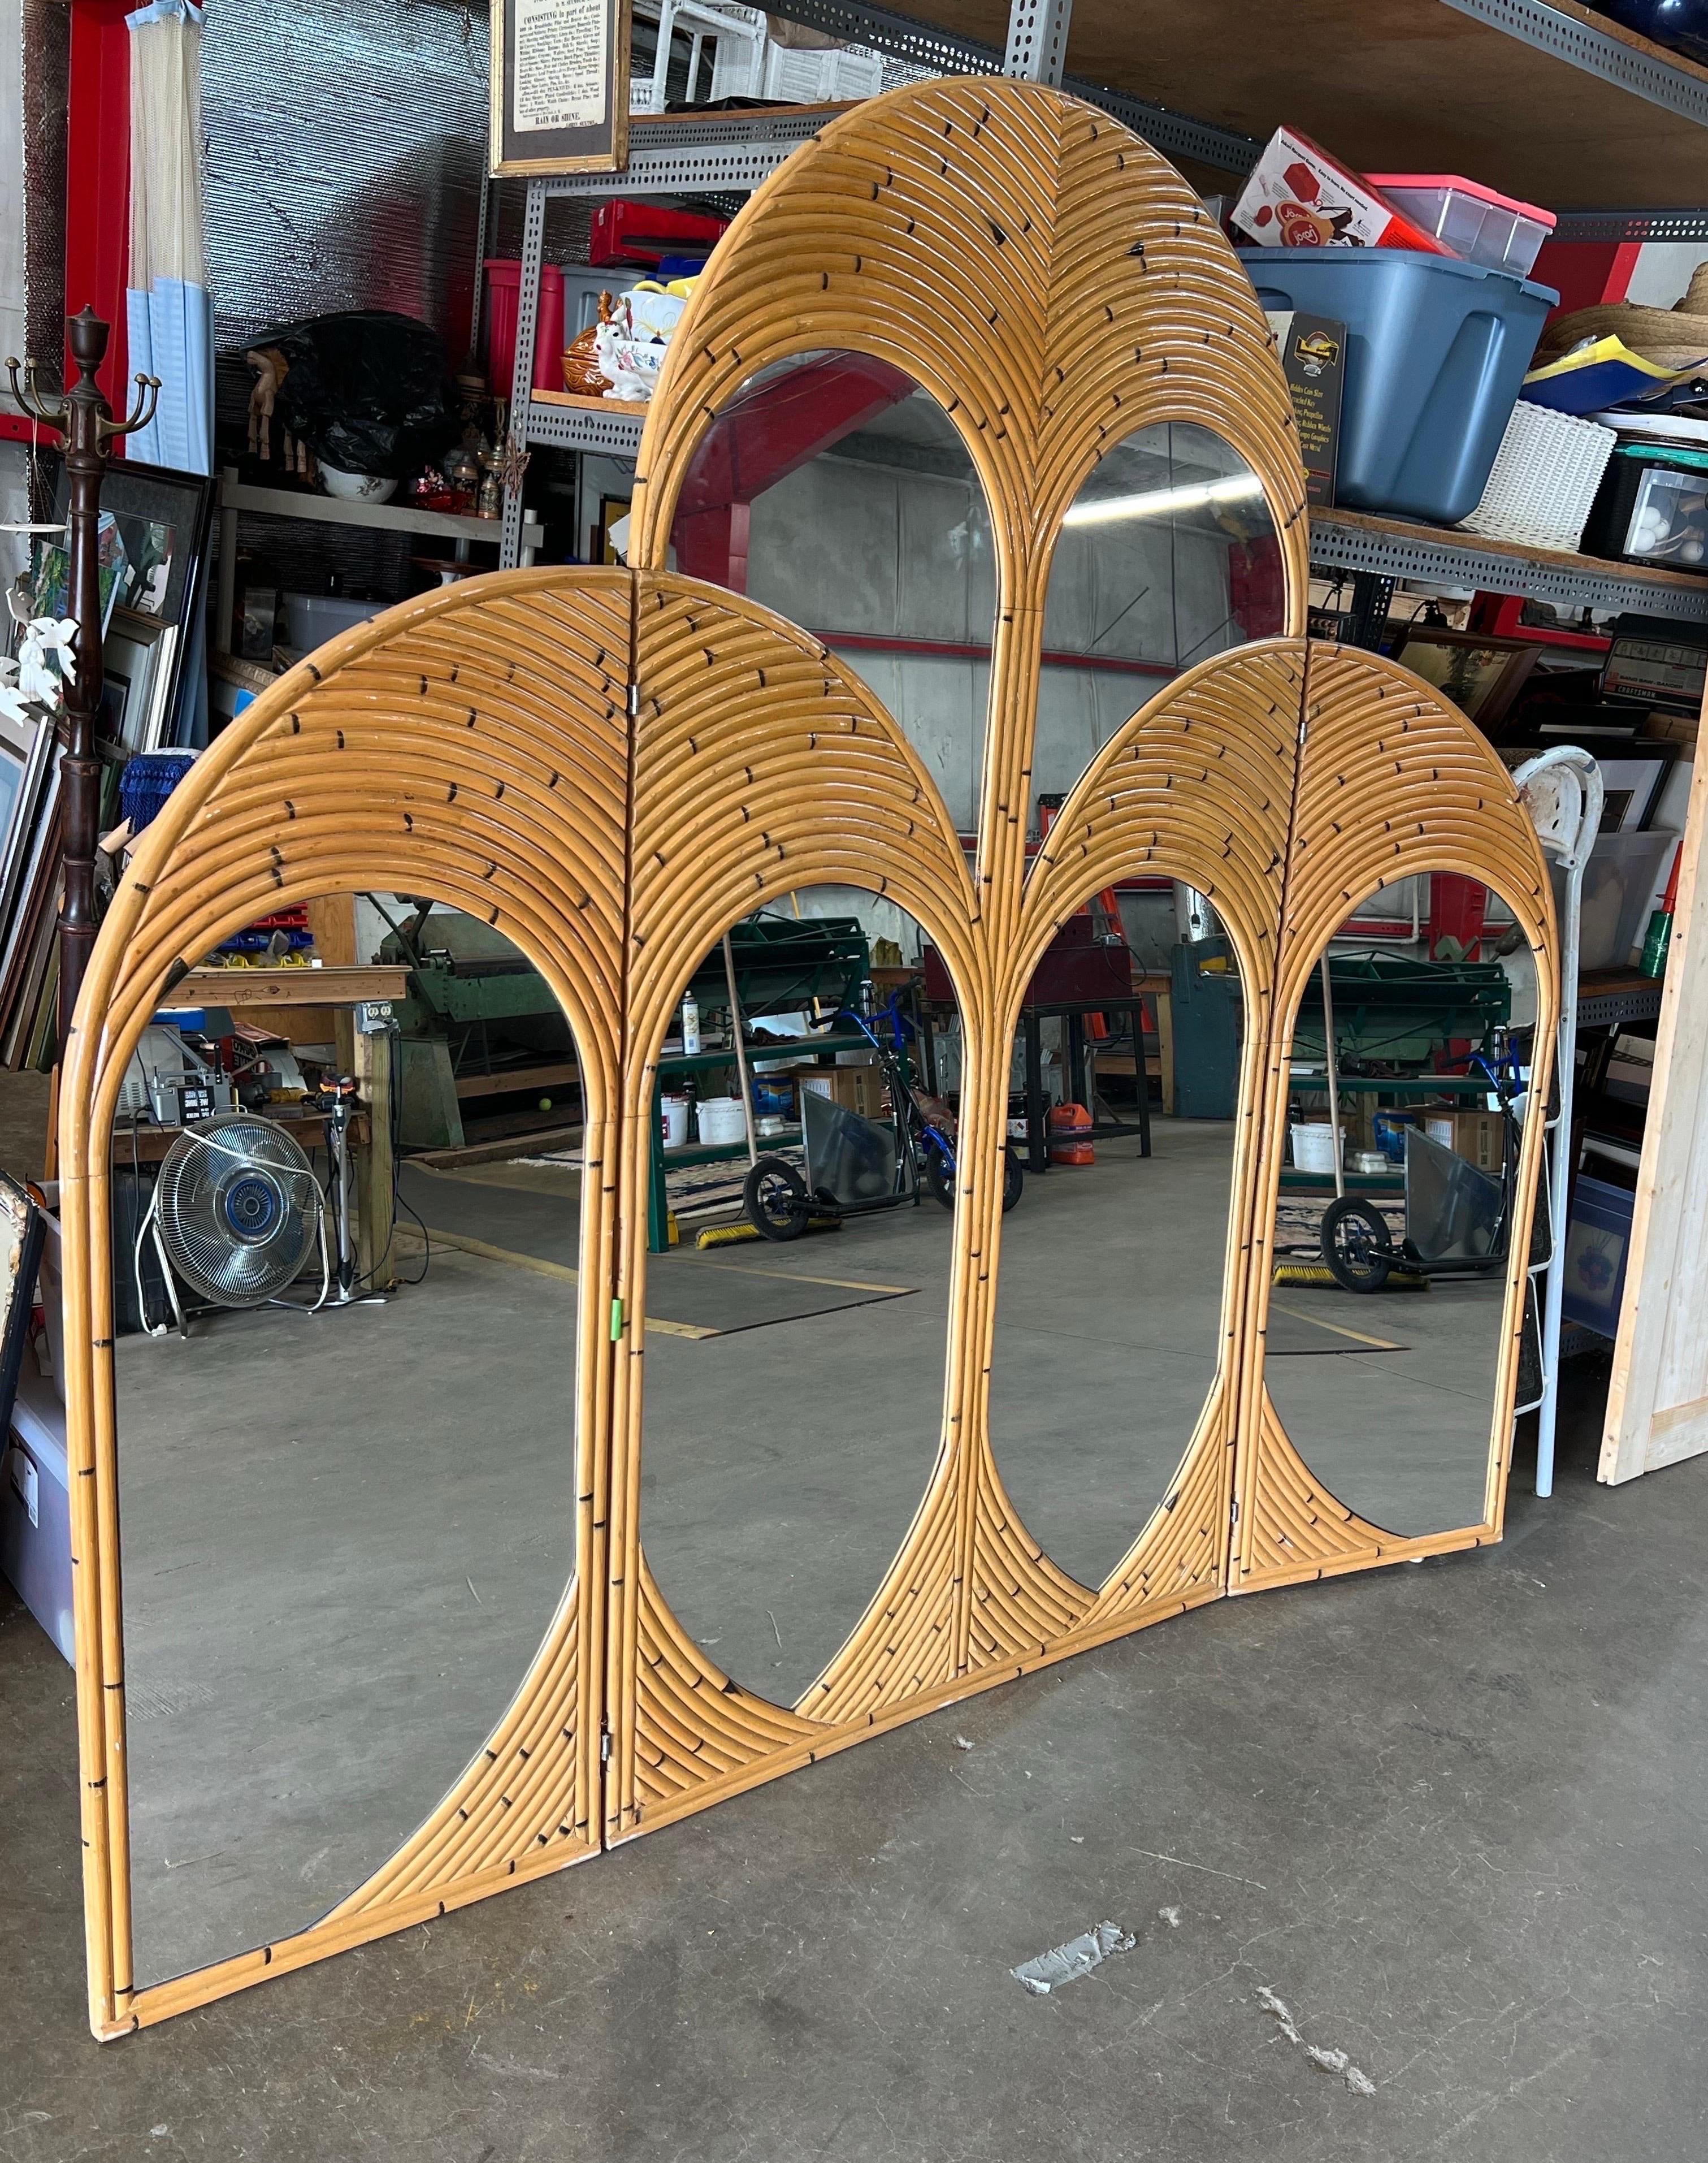 Rattan Arched Mirror Room Divider, 1970

Gorgeous one of a kind rattan mirrored room divider from the 1970s

Massive size with 7 feet tallest for the center and 5 feet tall for the side (left and right) panels